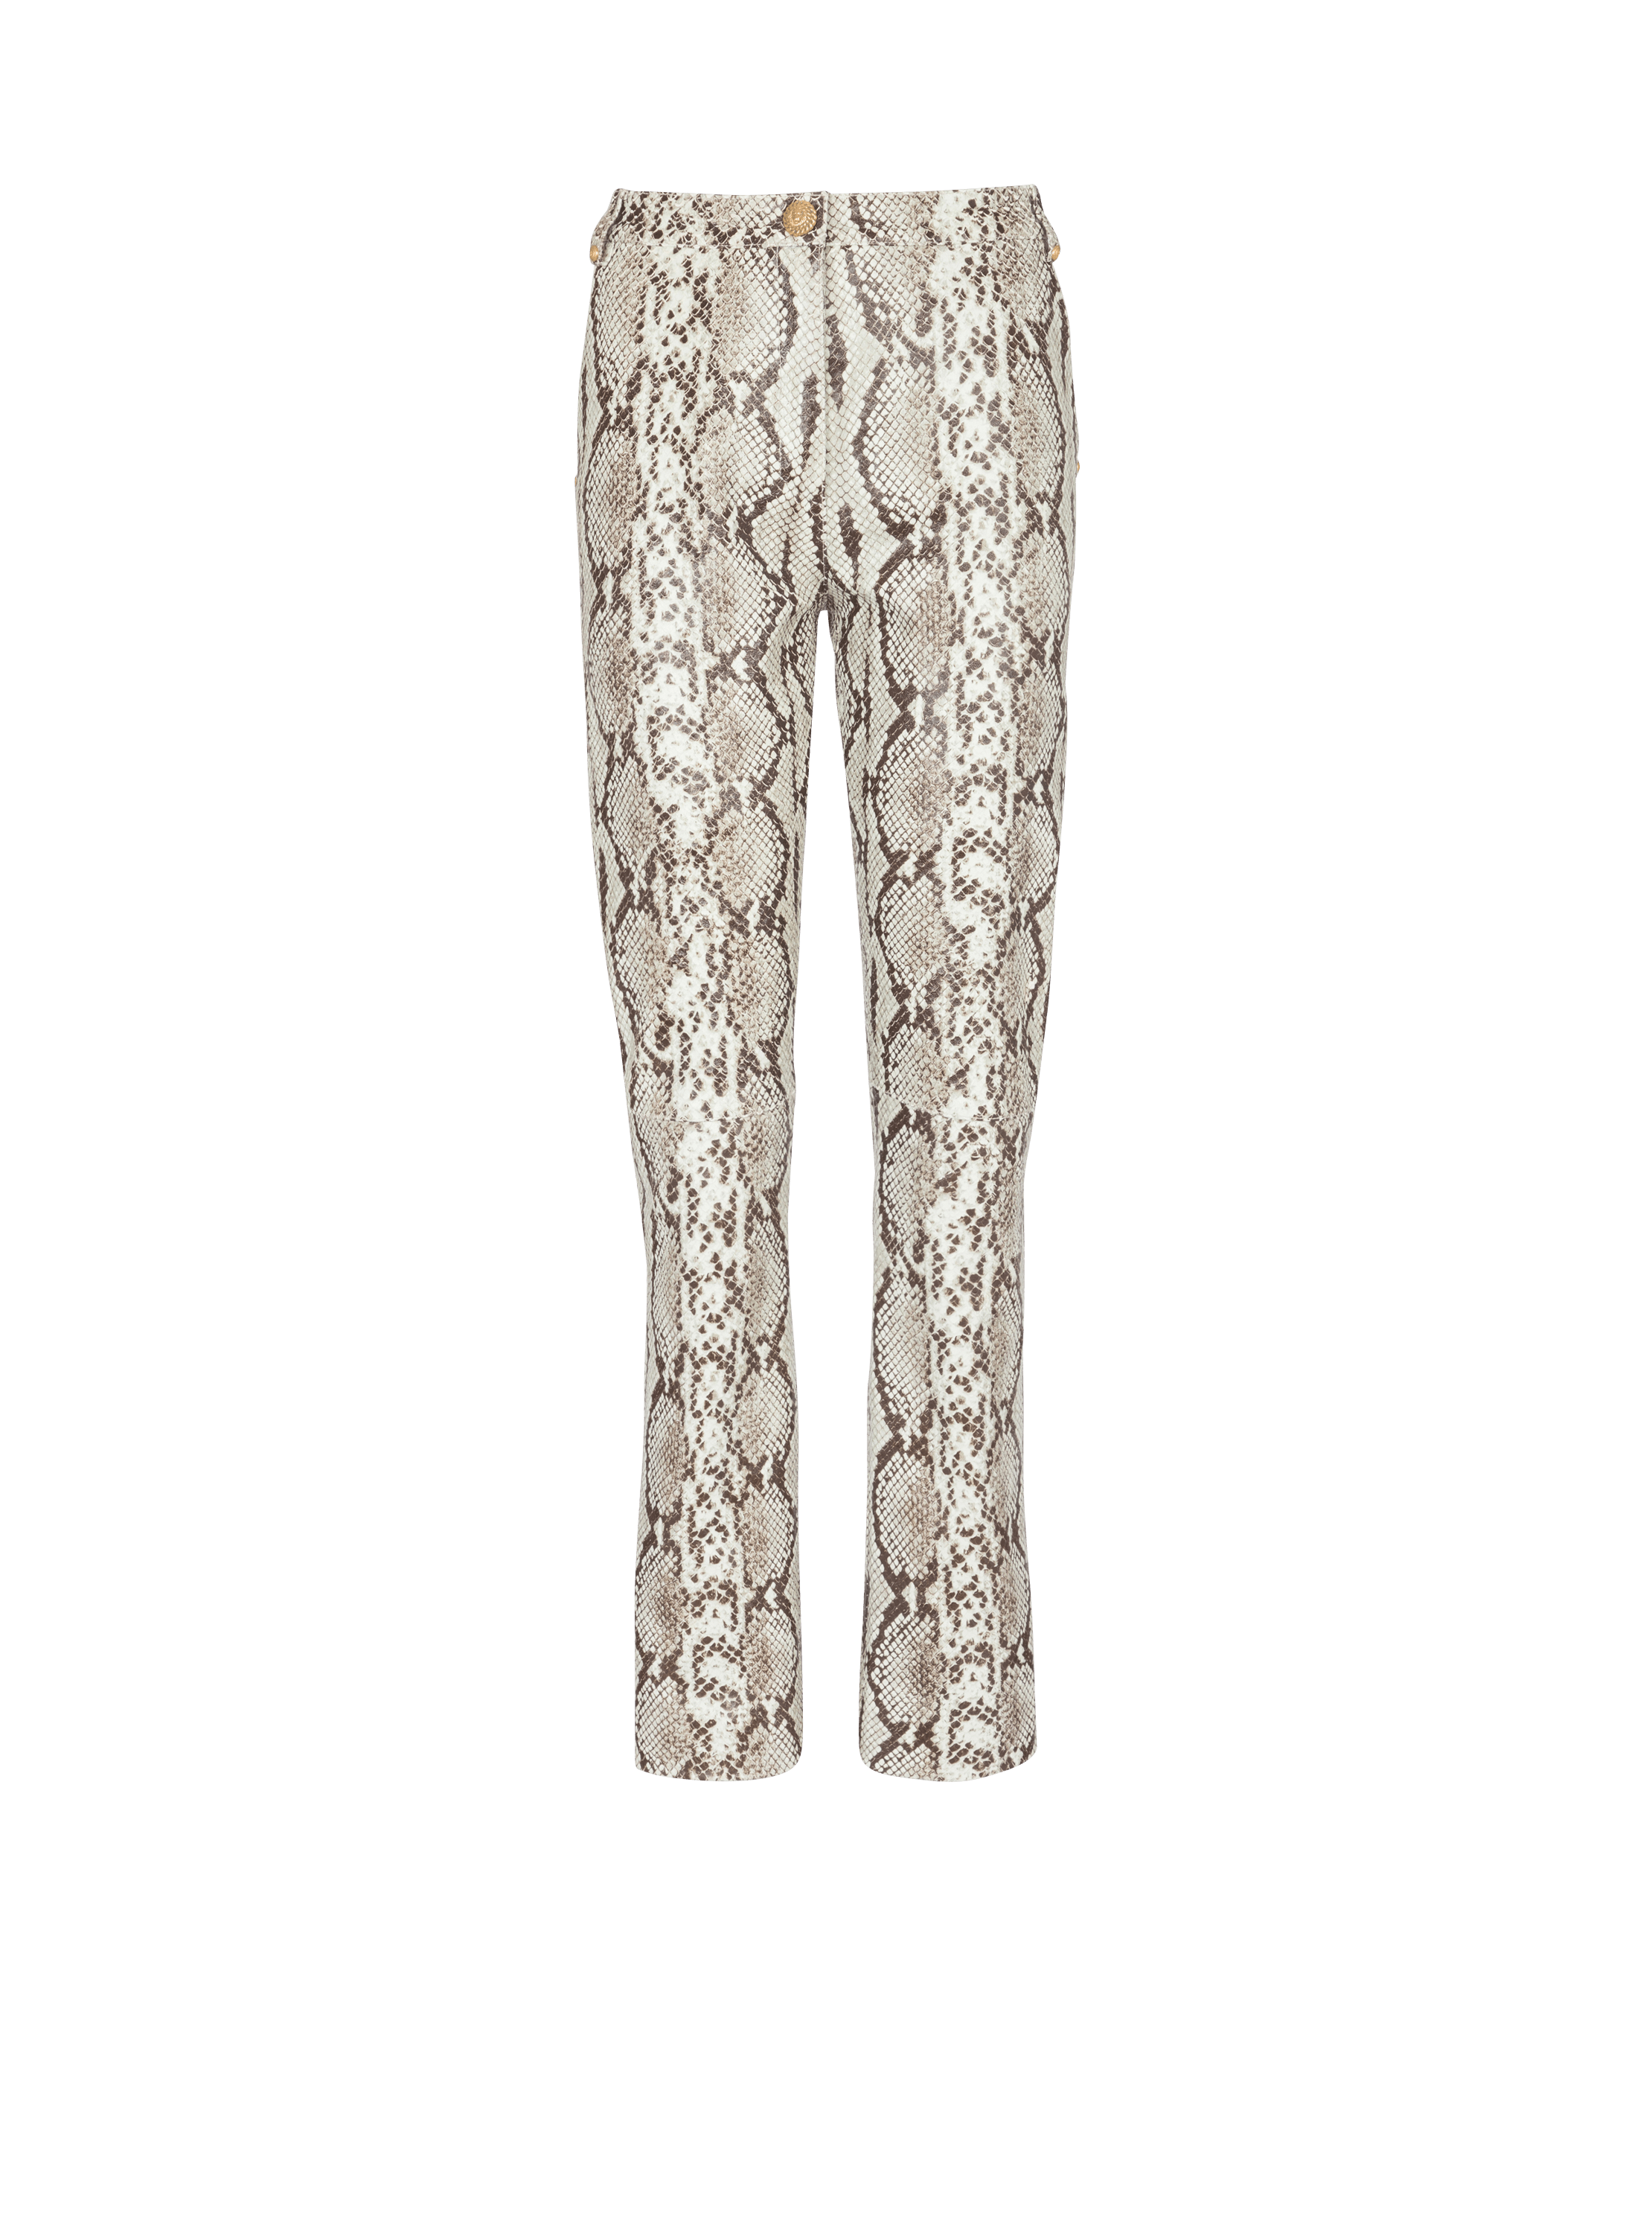 Snakeskin-effect leather trousers, brown, hi-res